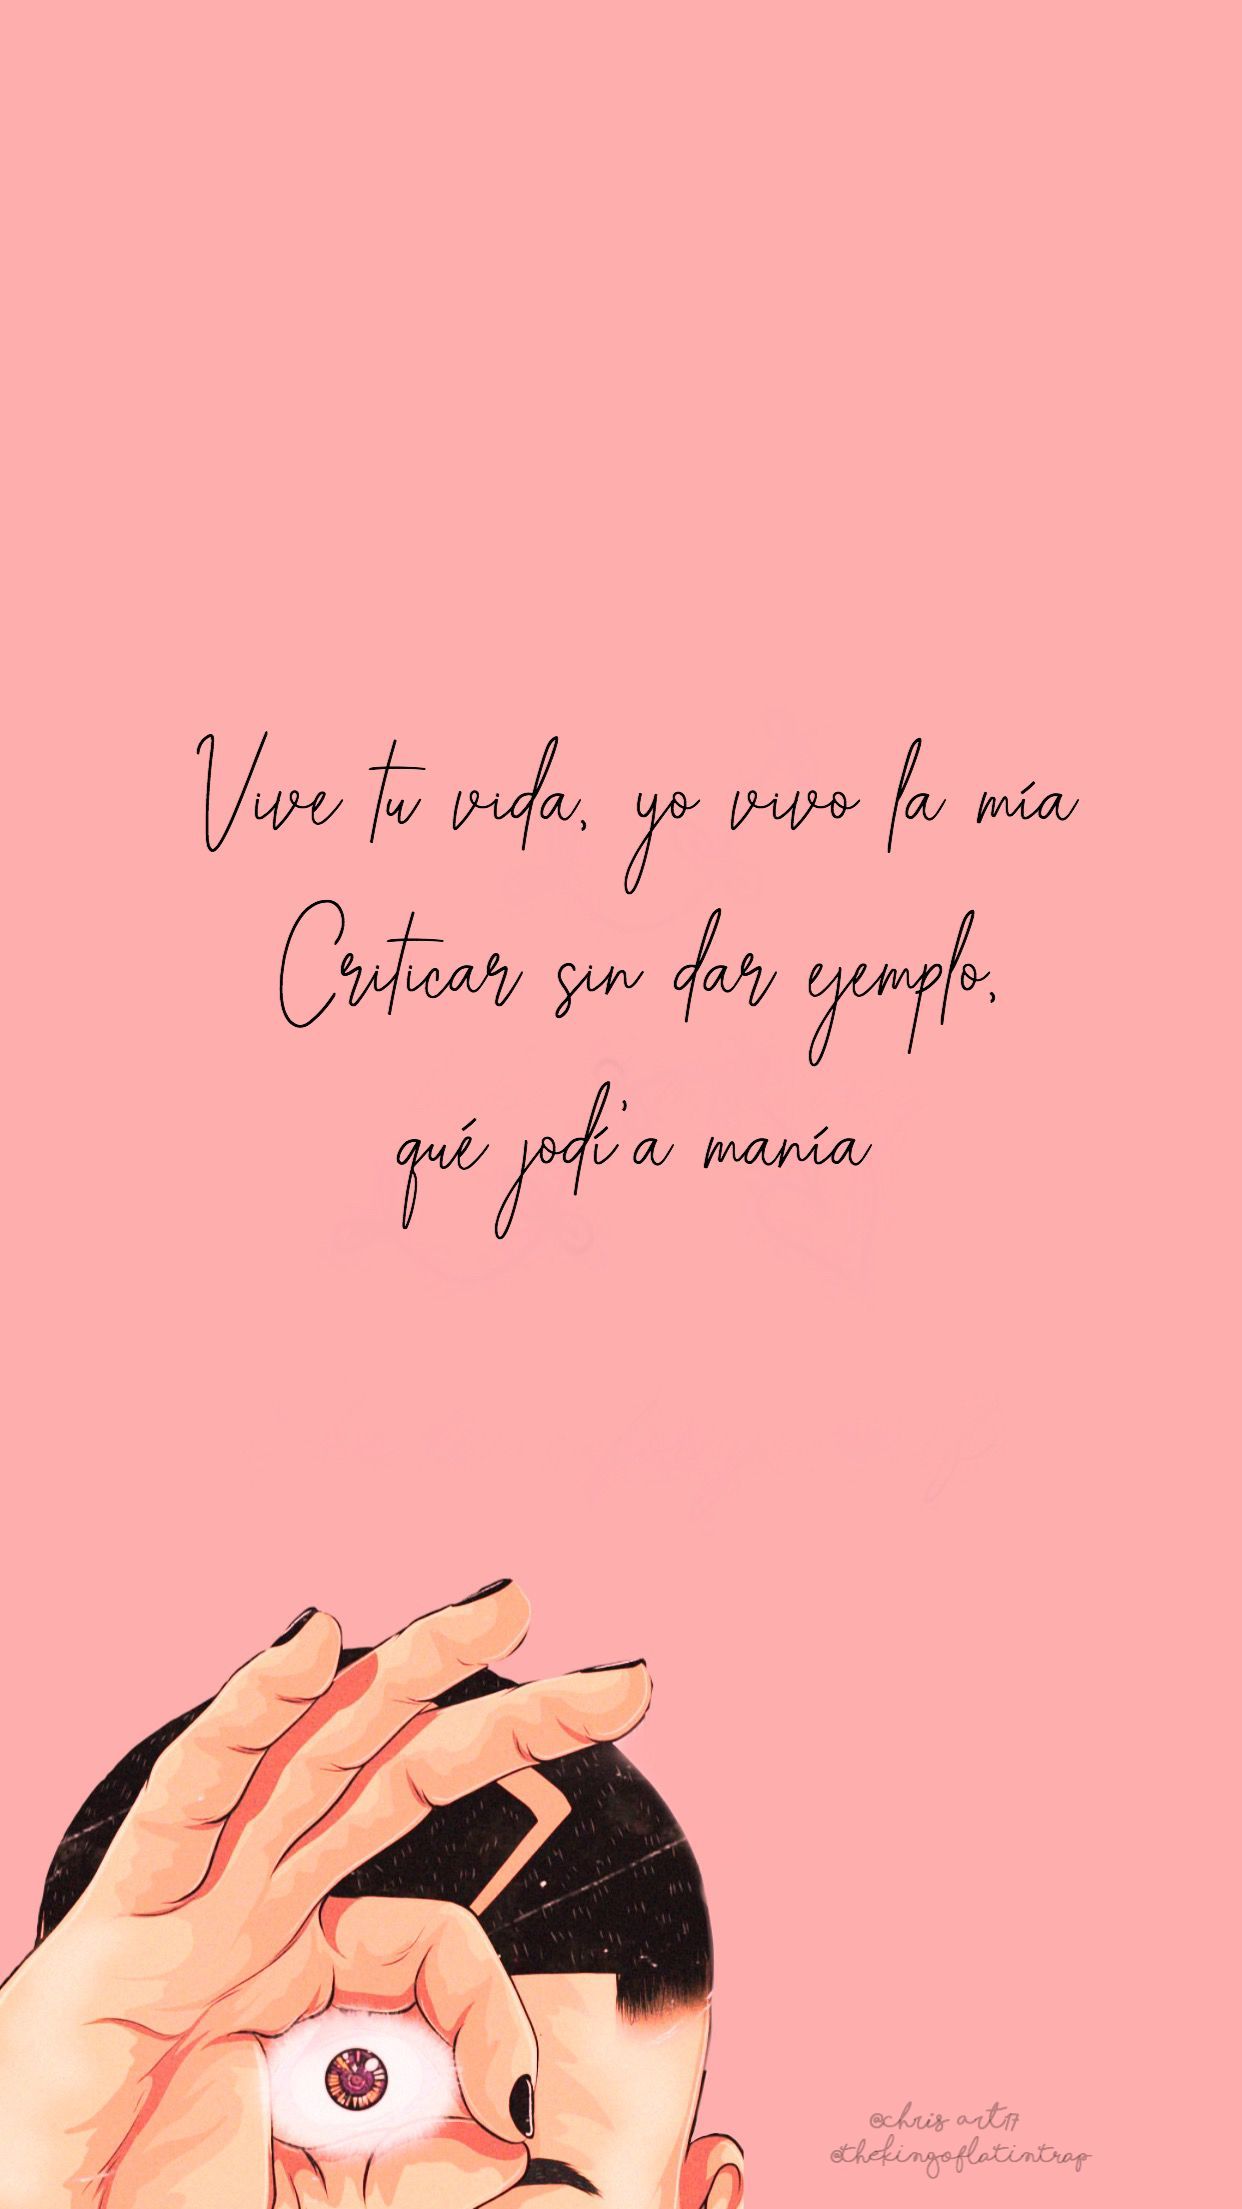 Aesthetic Spanish Words Wallpapers